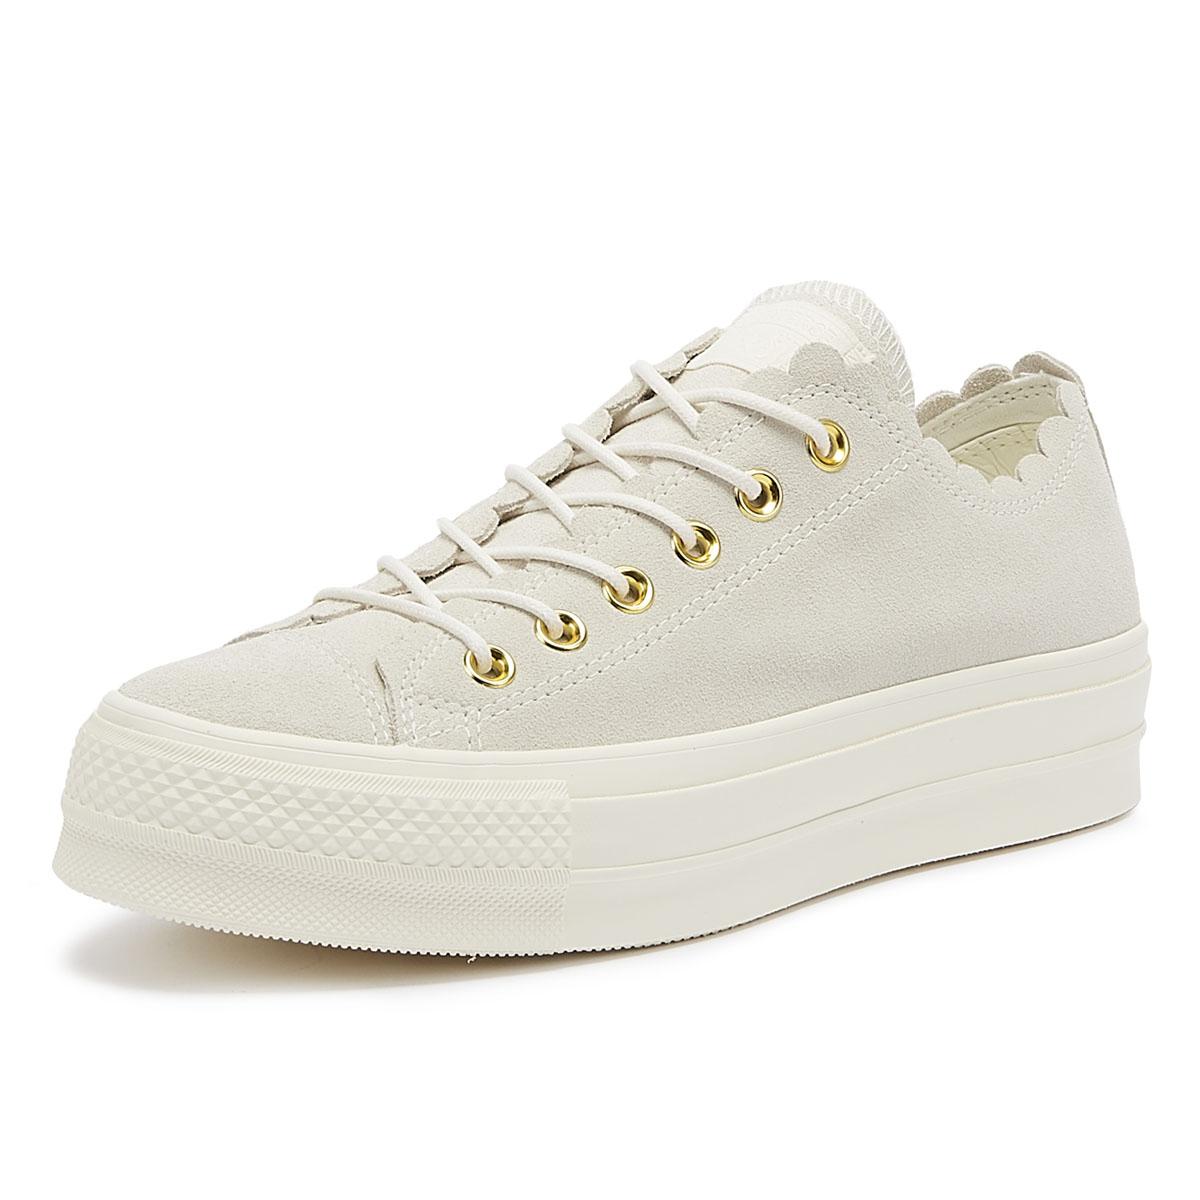 converse chuck taylor all star lift frilly thrills low top